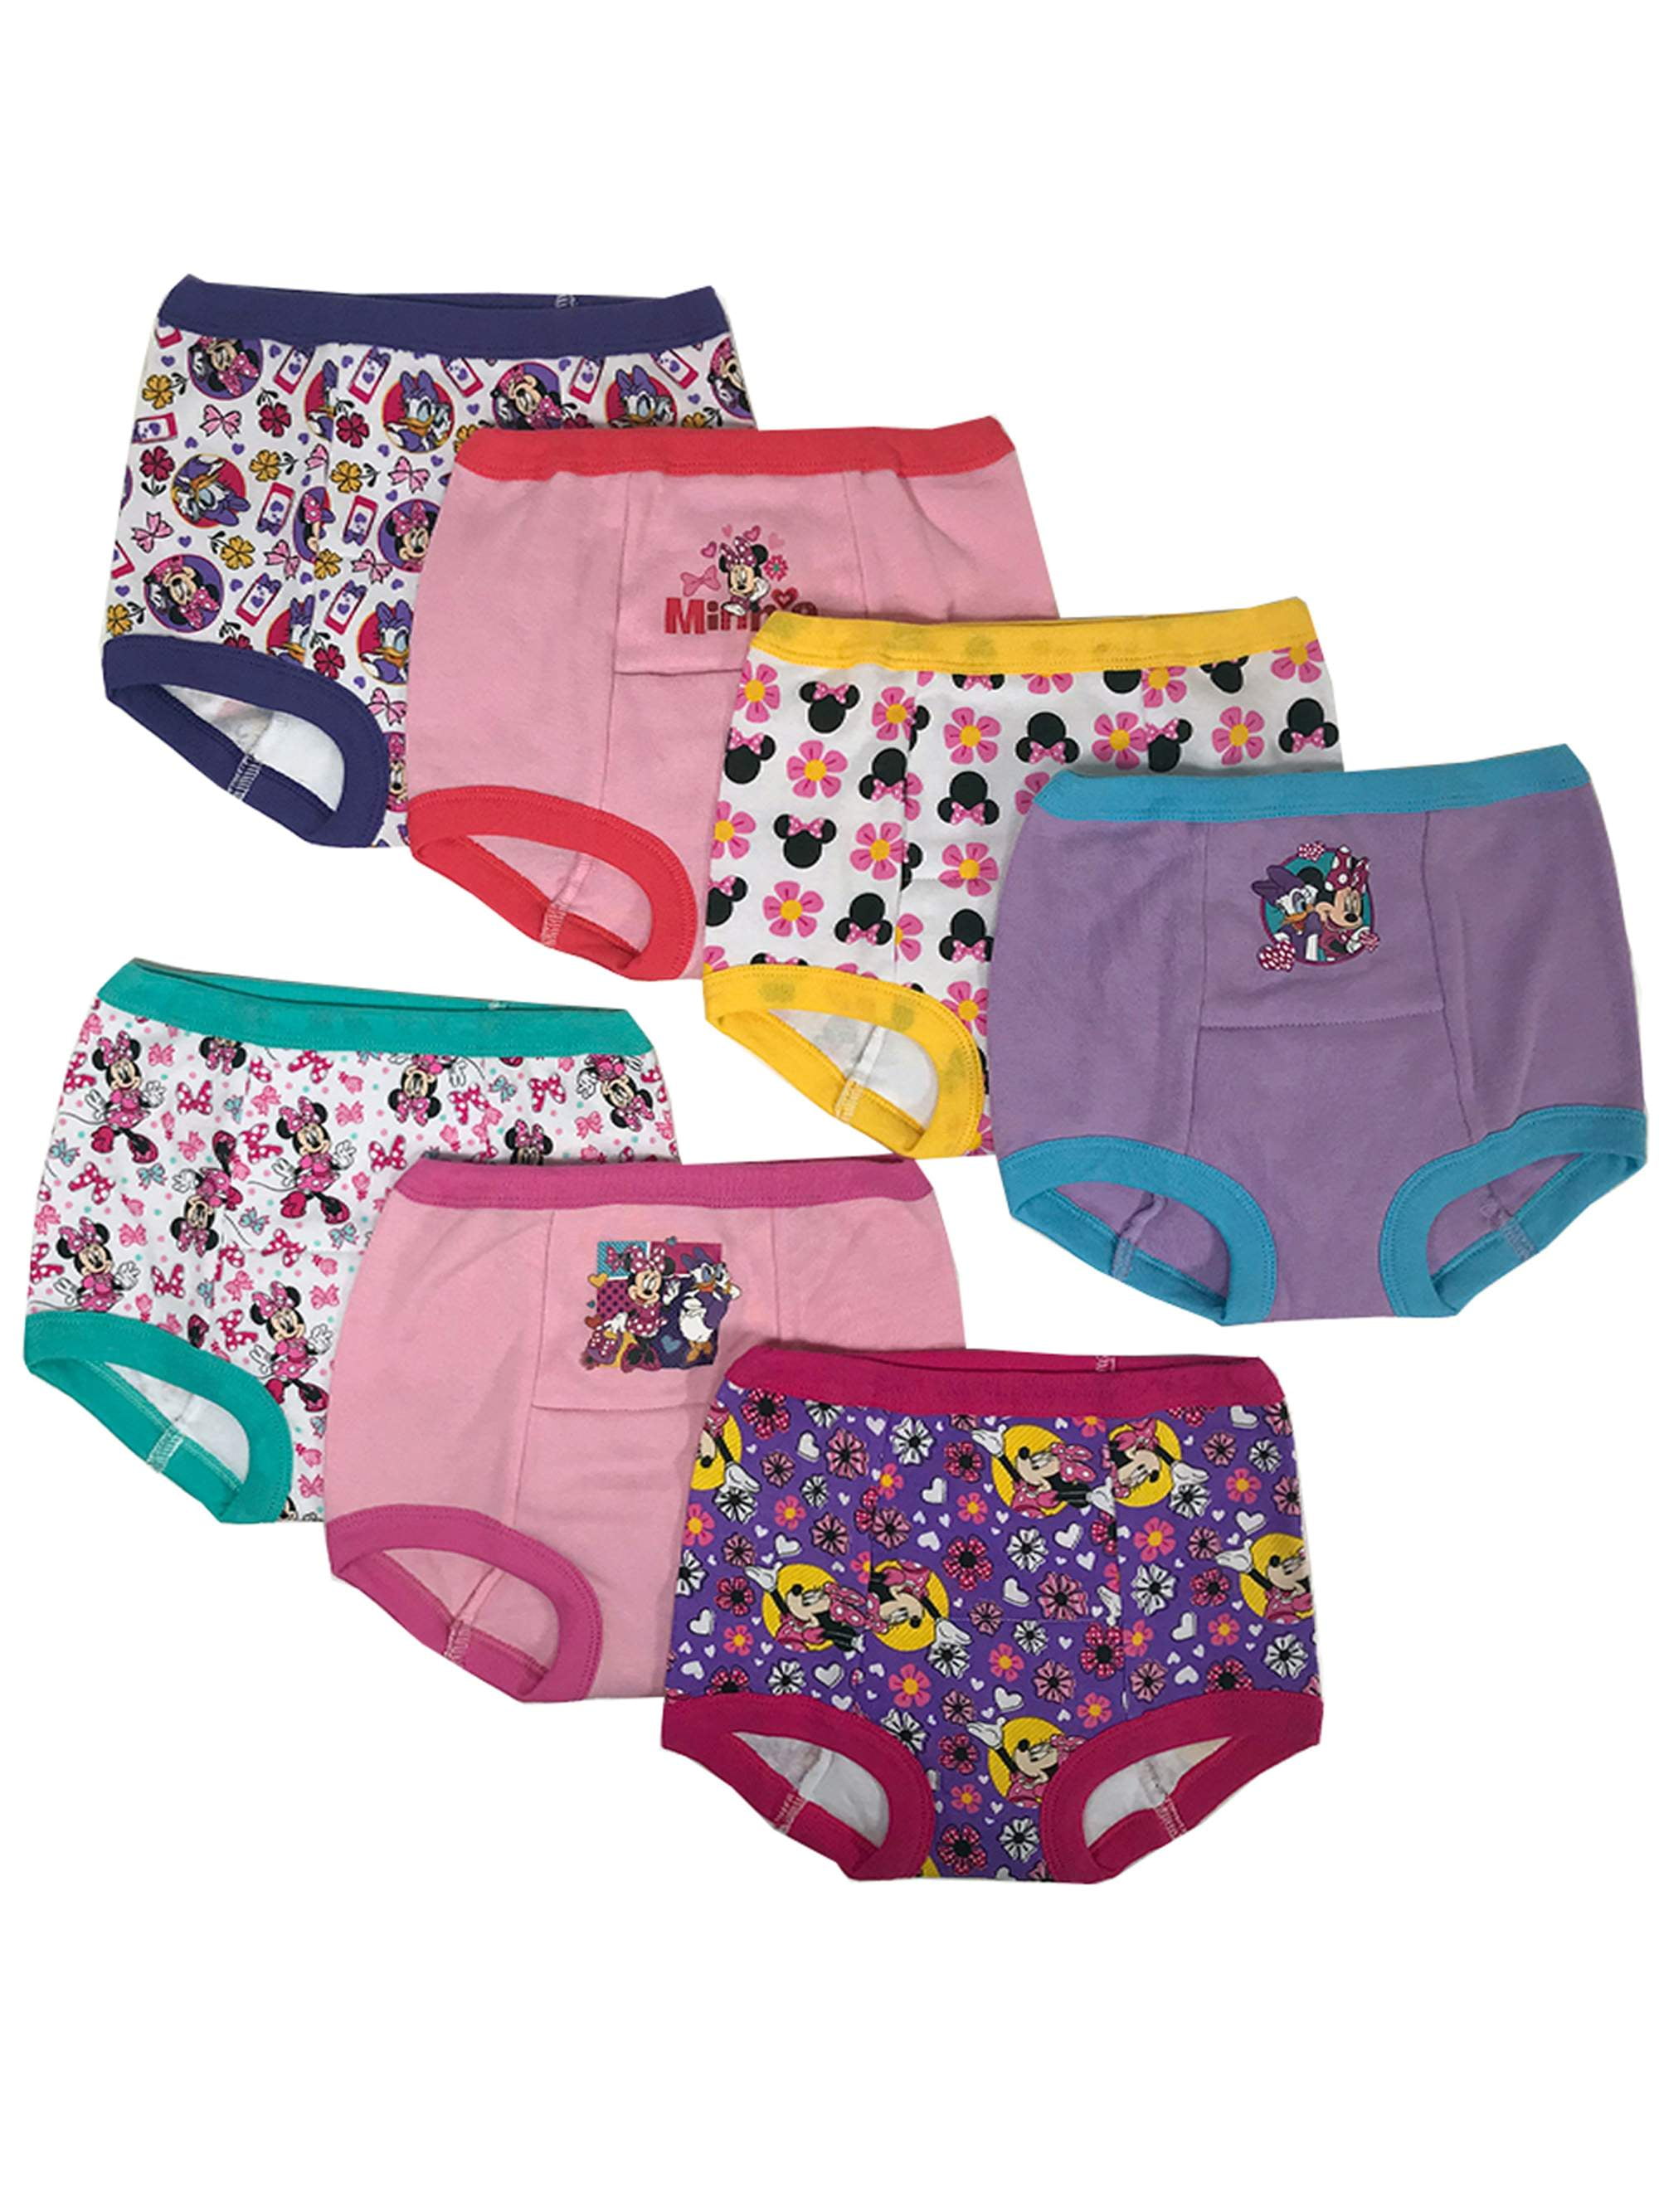 Minnie Mouse Toddler Girls' Panties, 6 pack Sizes 2T-4T - Walmart